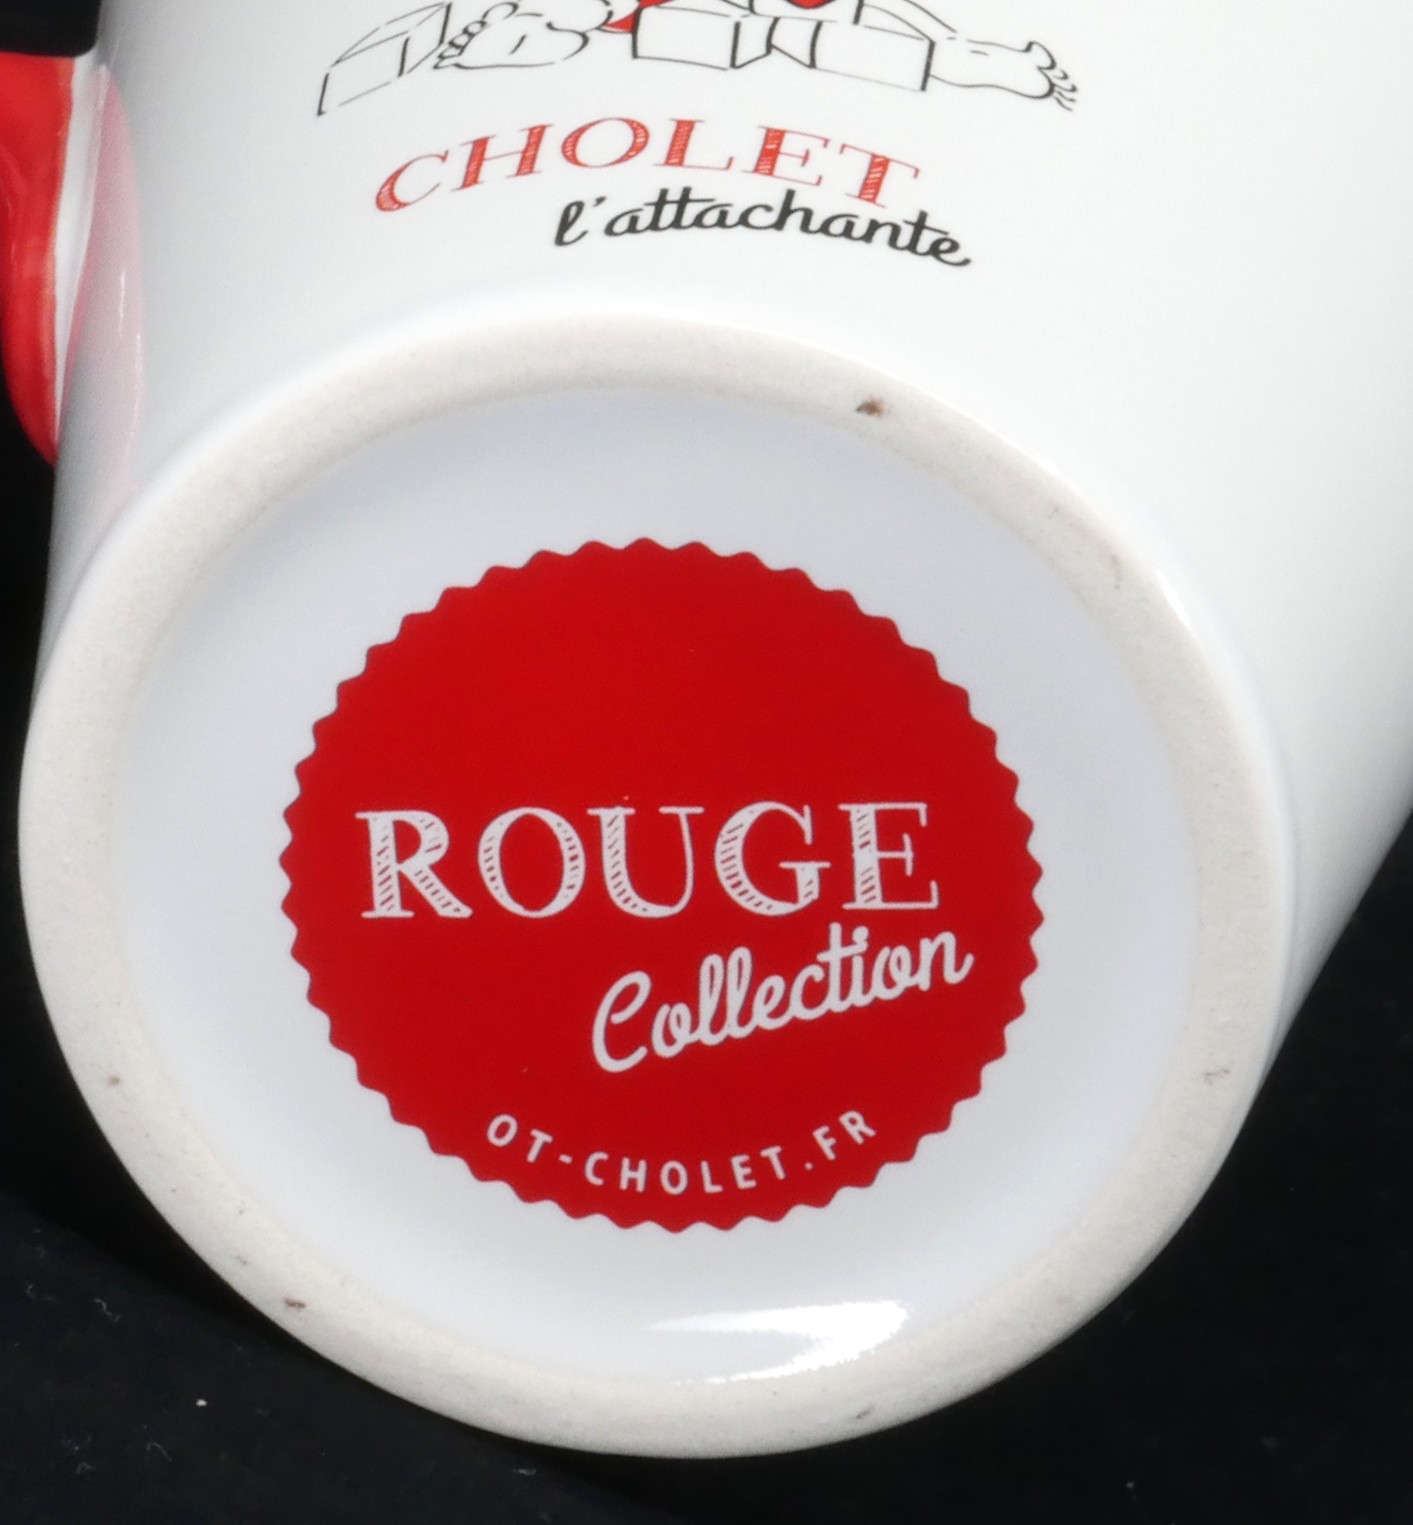 pastille-rouge-collection-mugs-cholet